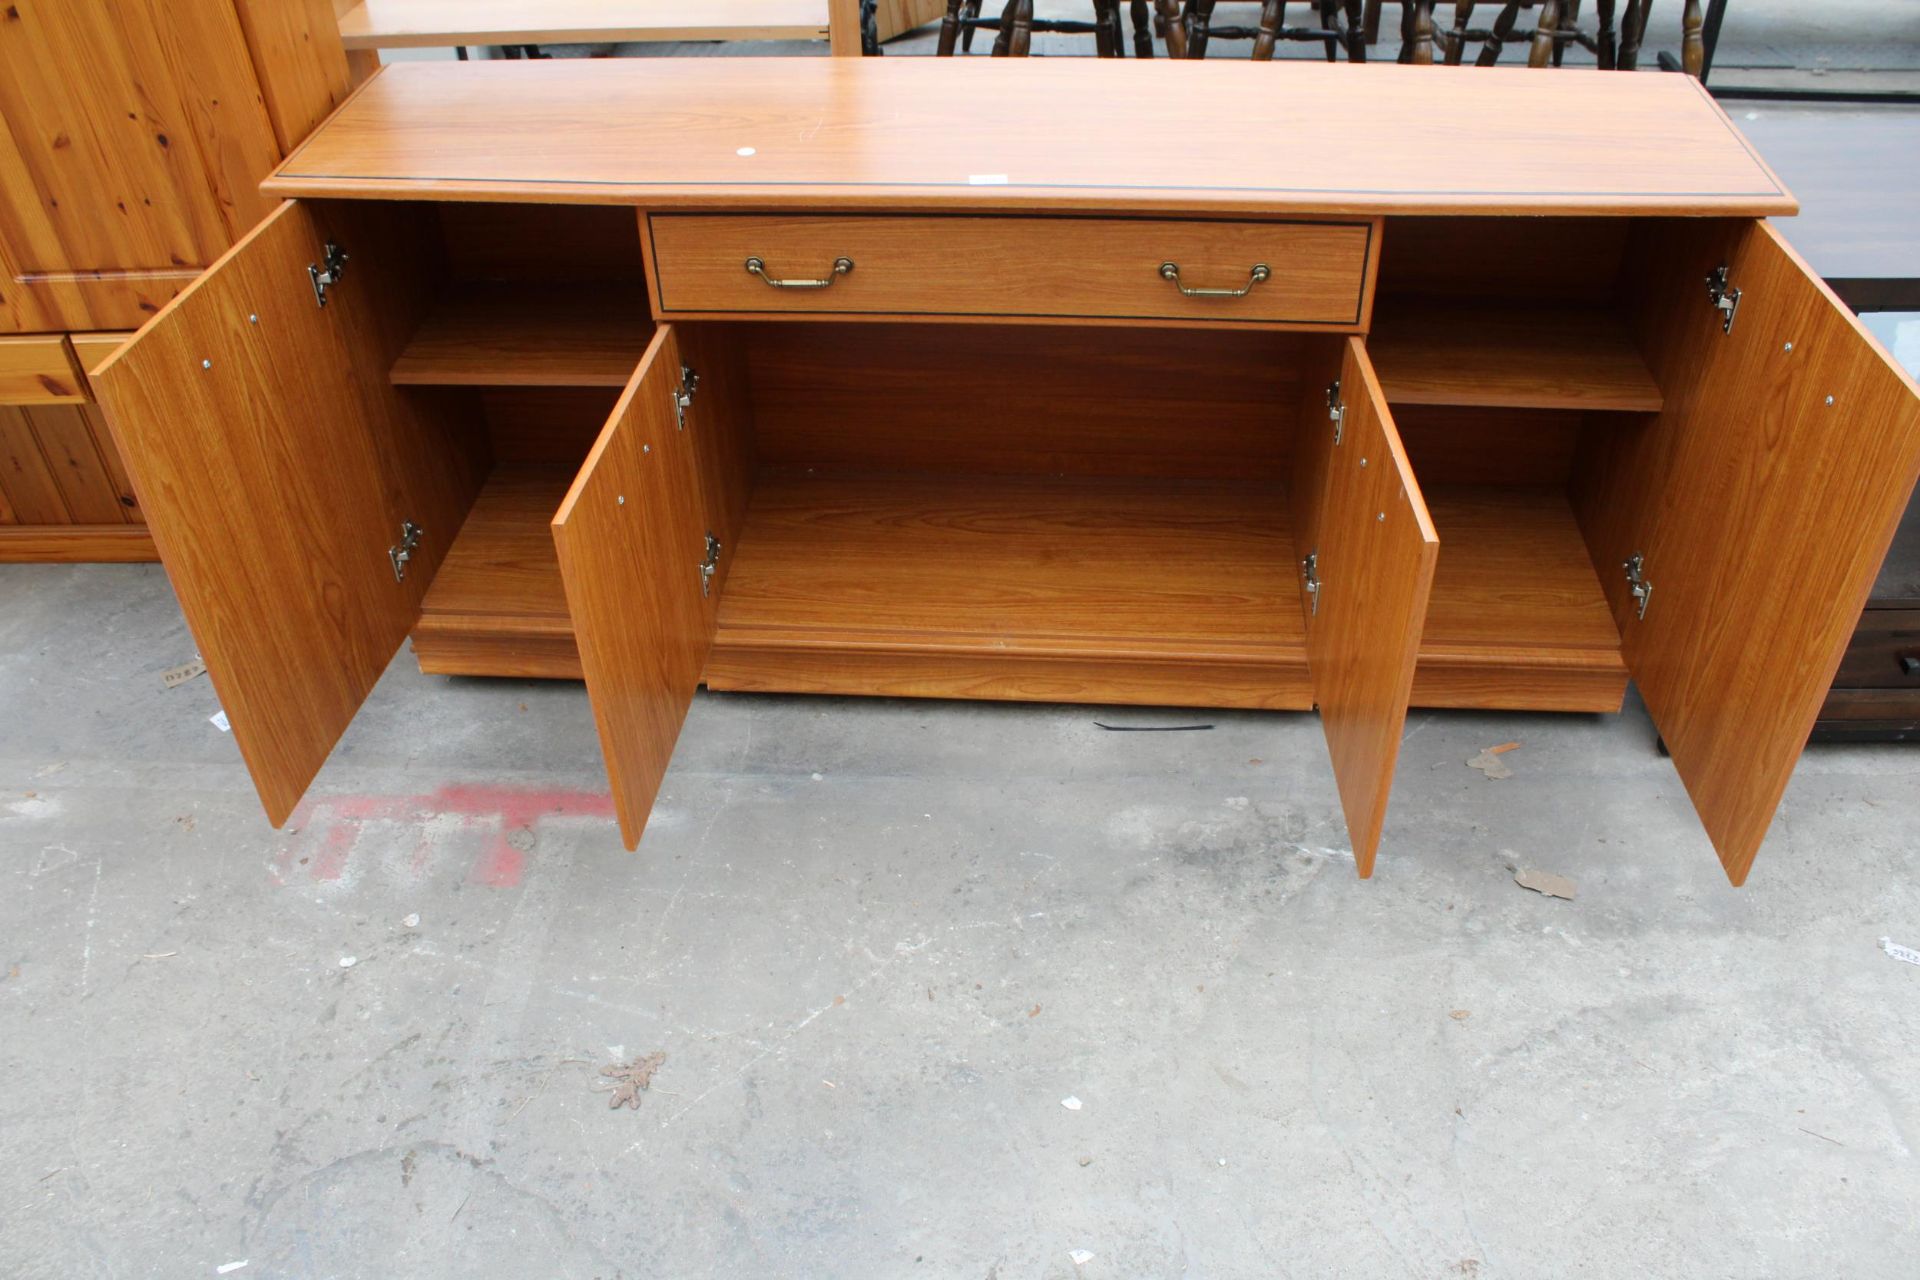 A WOODBERRY BROS AND HAINES SIDEBOARD 64" WIDE - Image 2 of 2